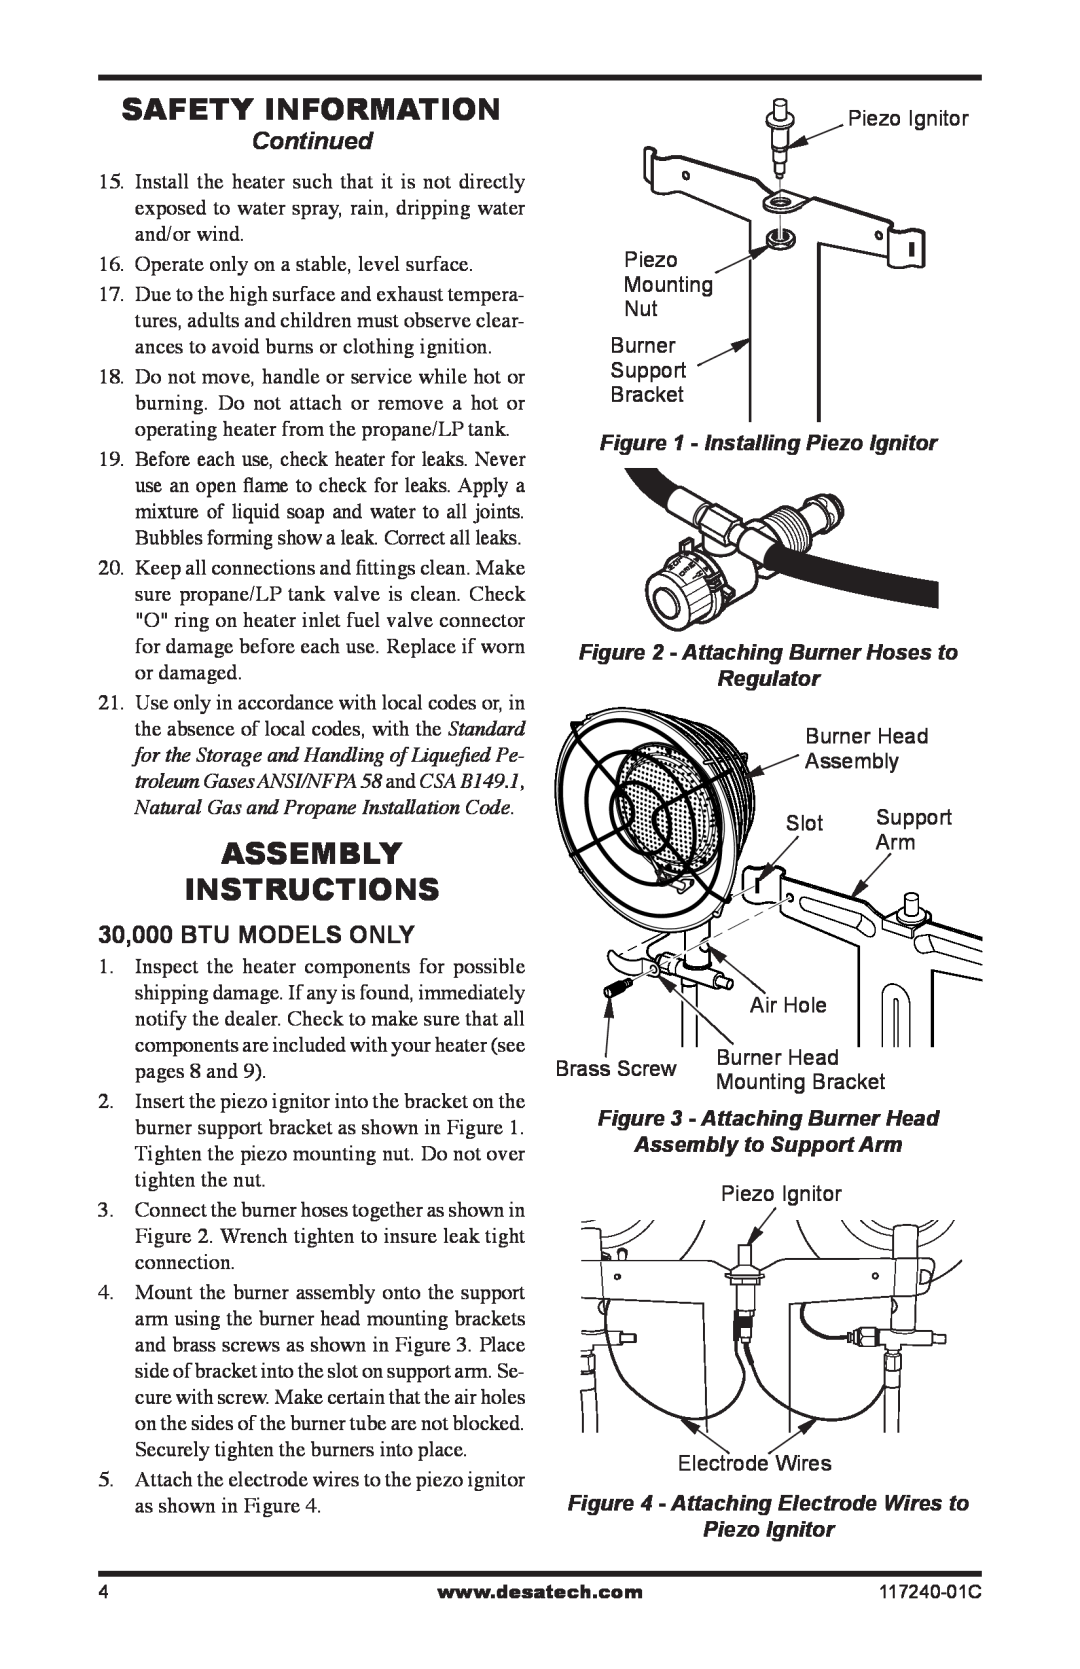 Desa 000 BTu, 10 Safety Information, Assembly Instructions, Continued, Installing Piezo Ignitor, Attaching Burner Head 